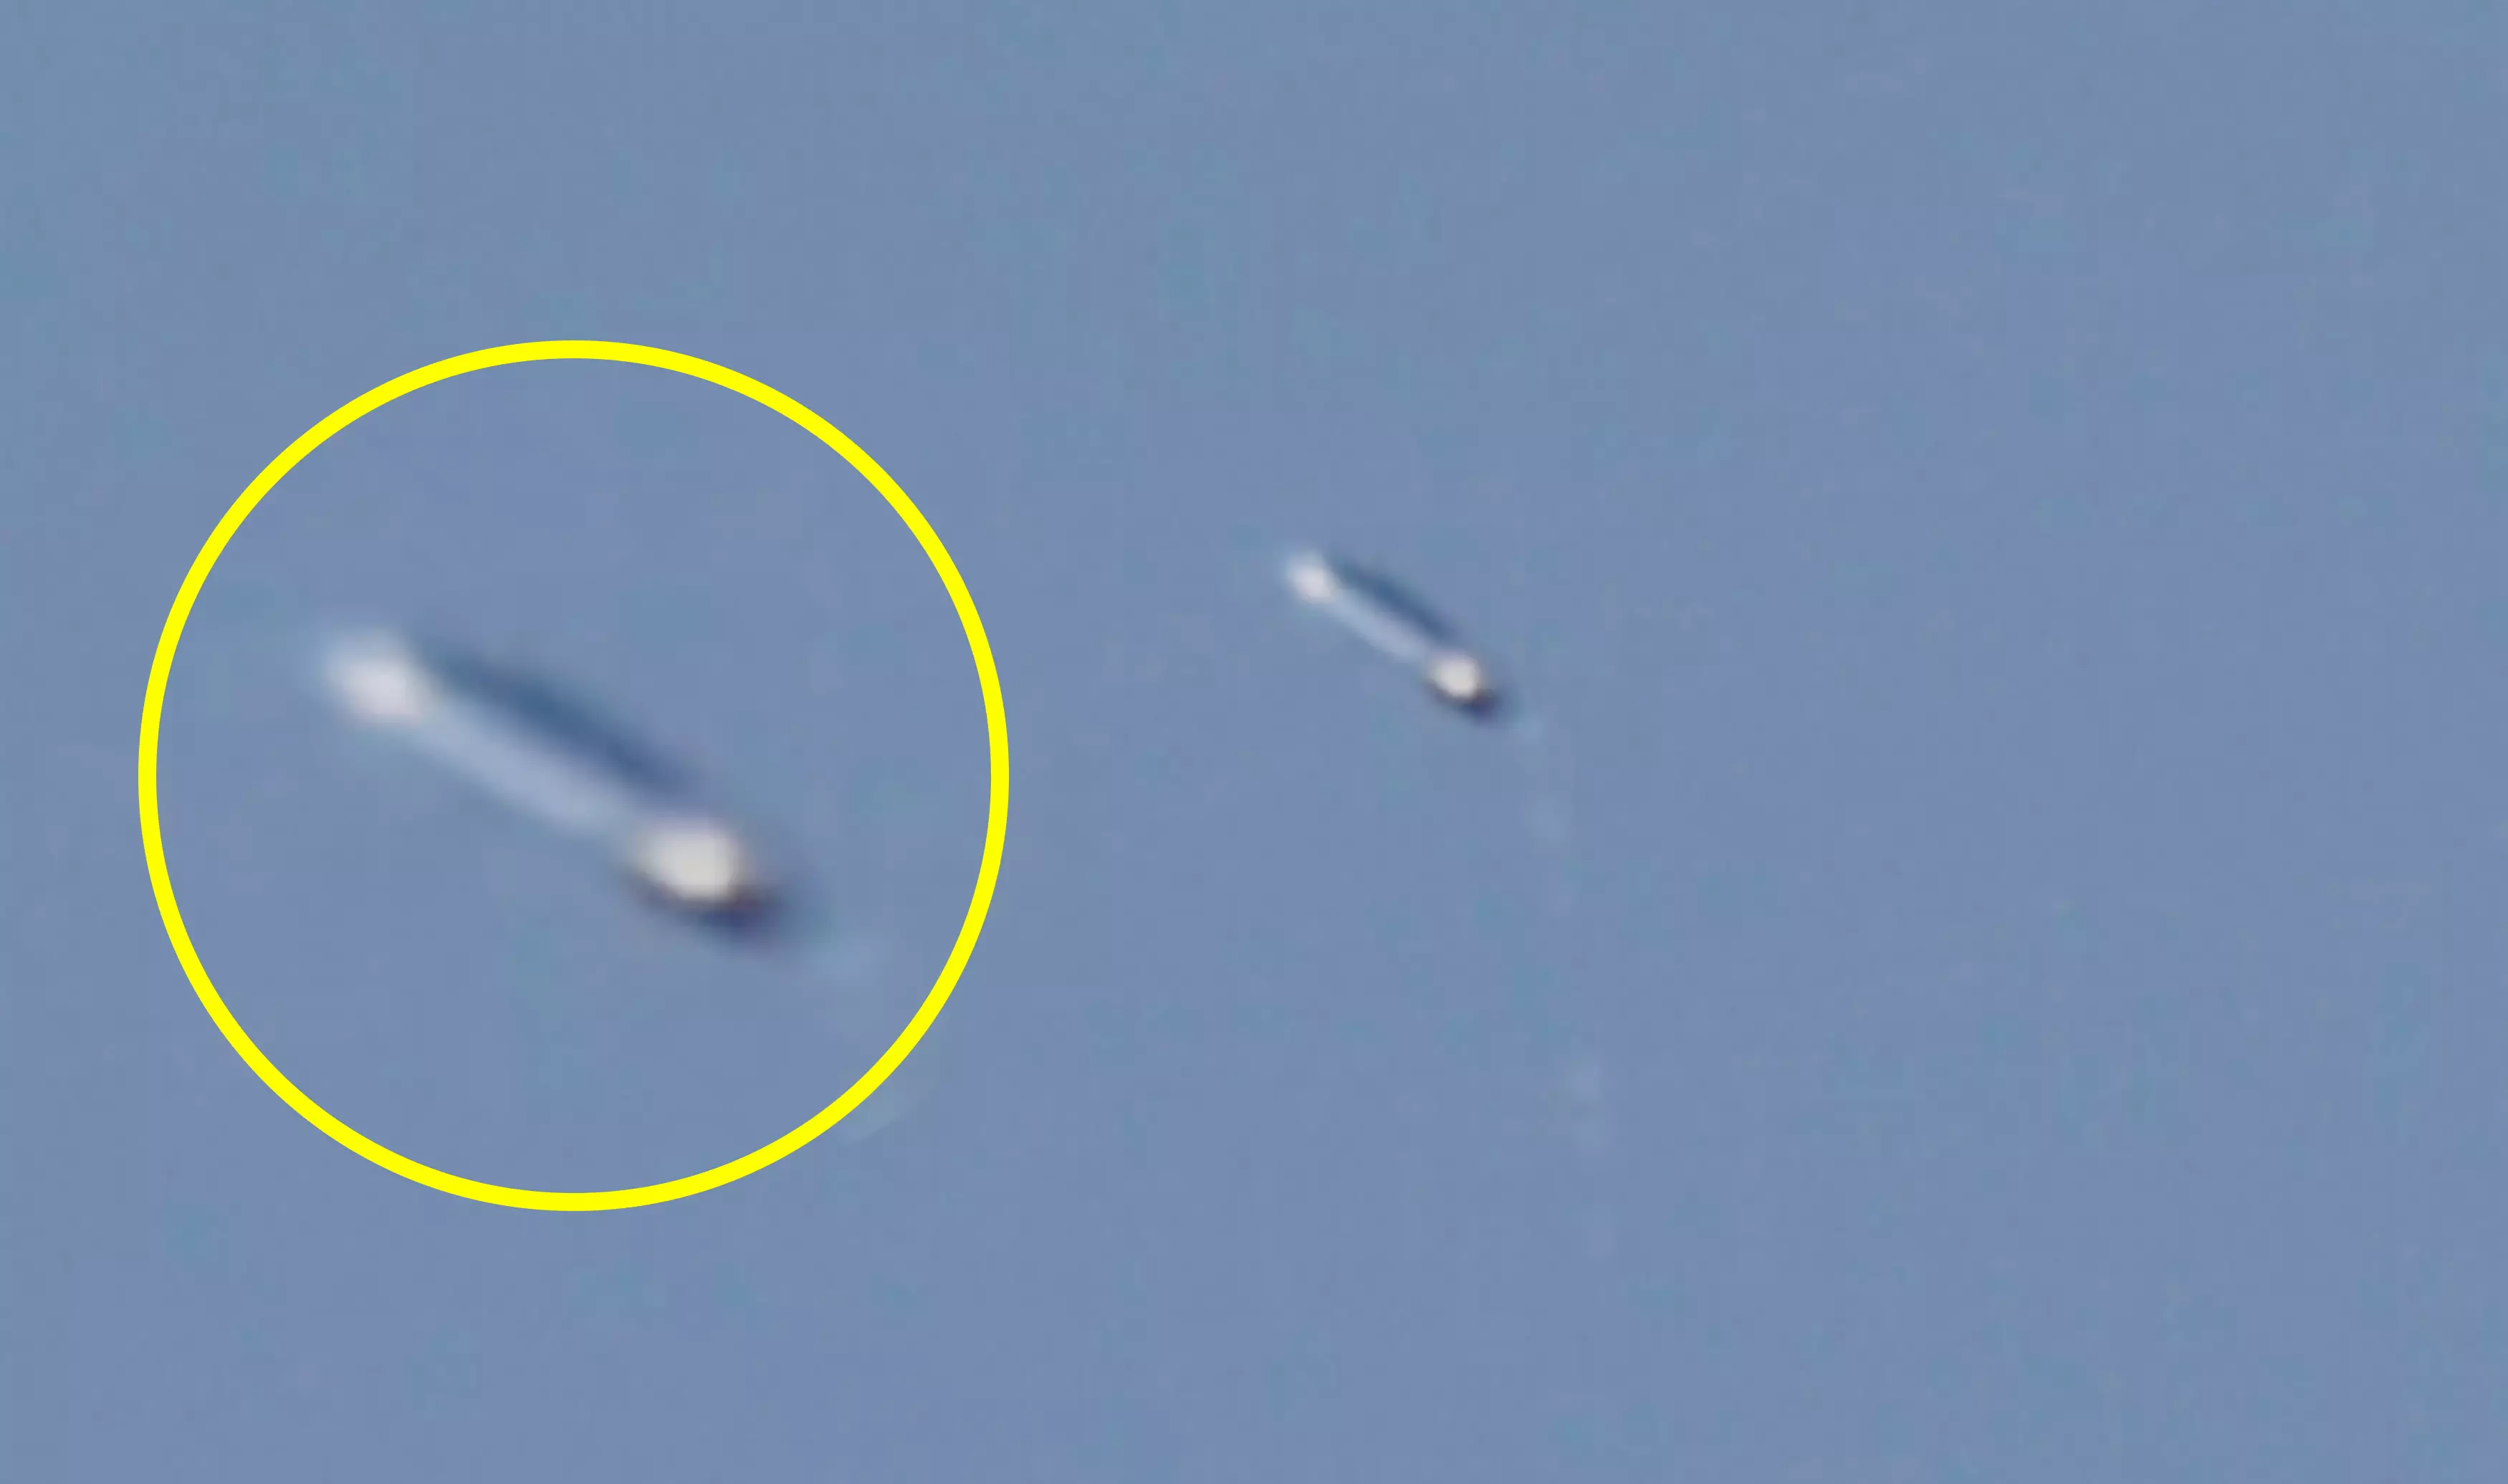 A man filmed what he says is a UFO near to his house.